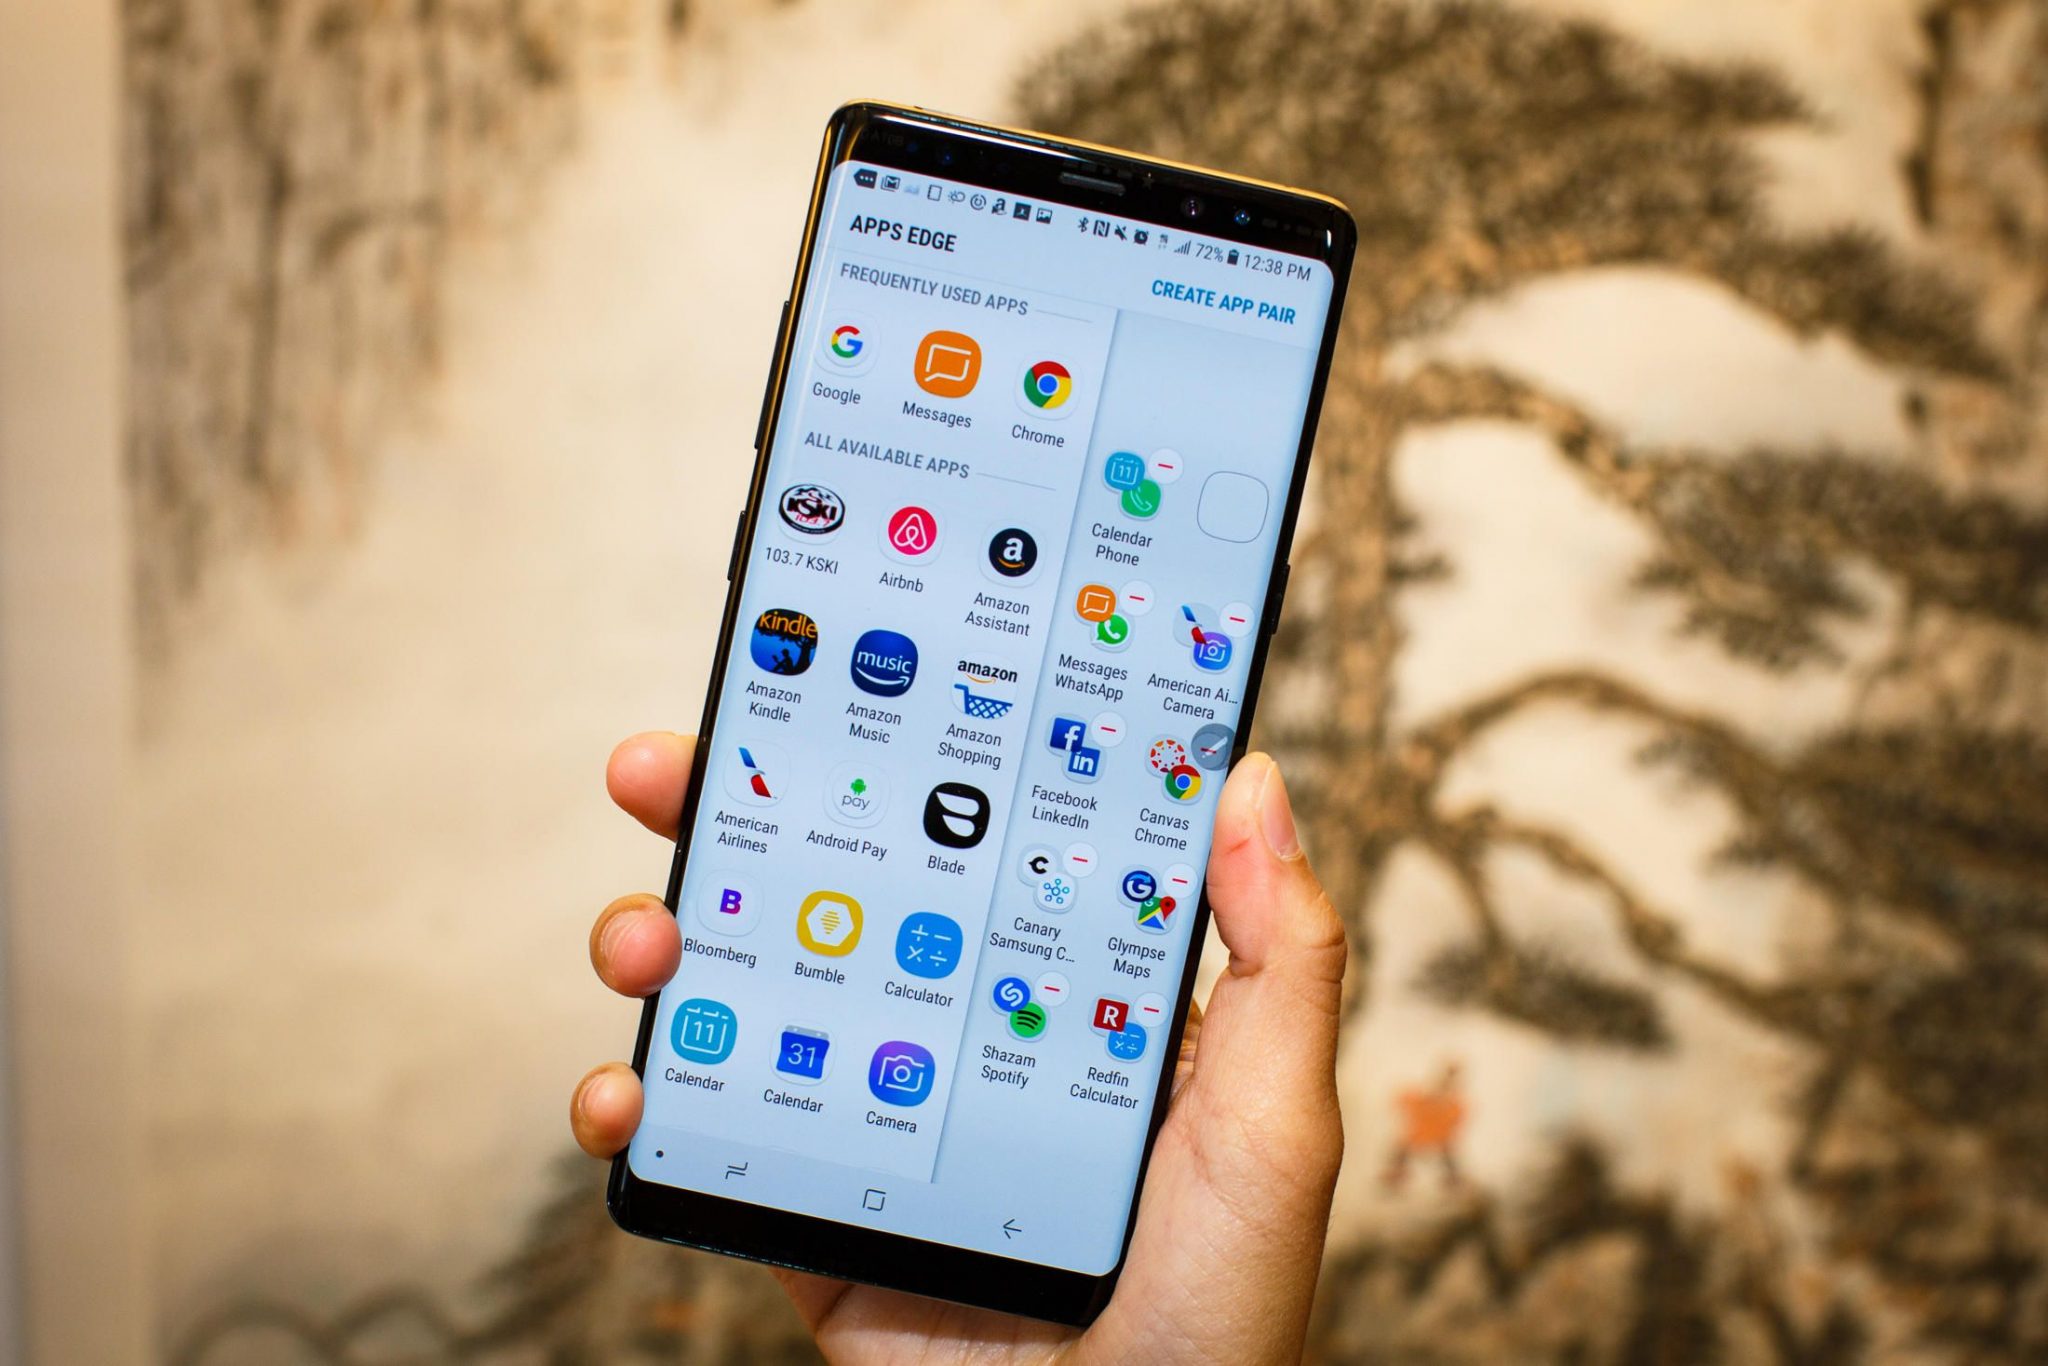 How to Install Apps on Galaxy Note 8